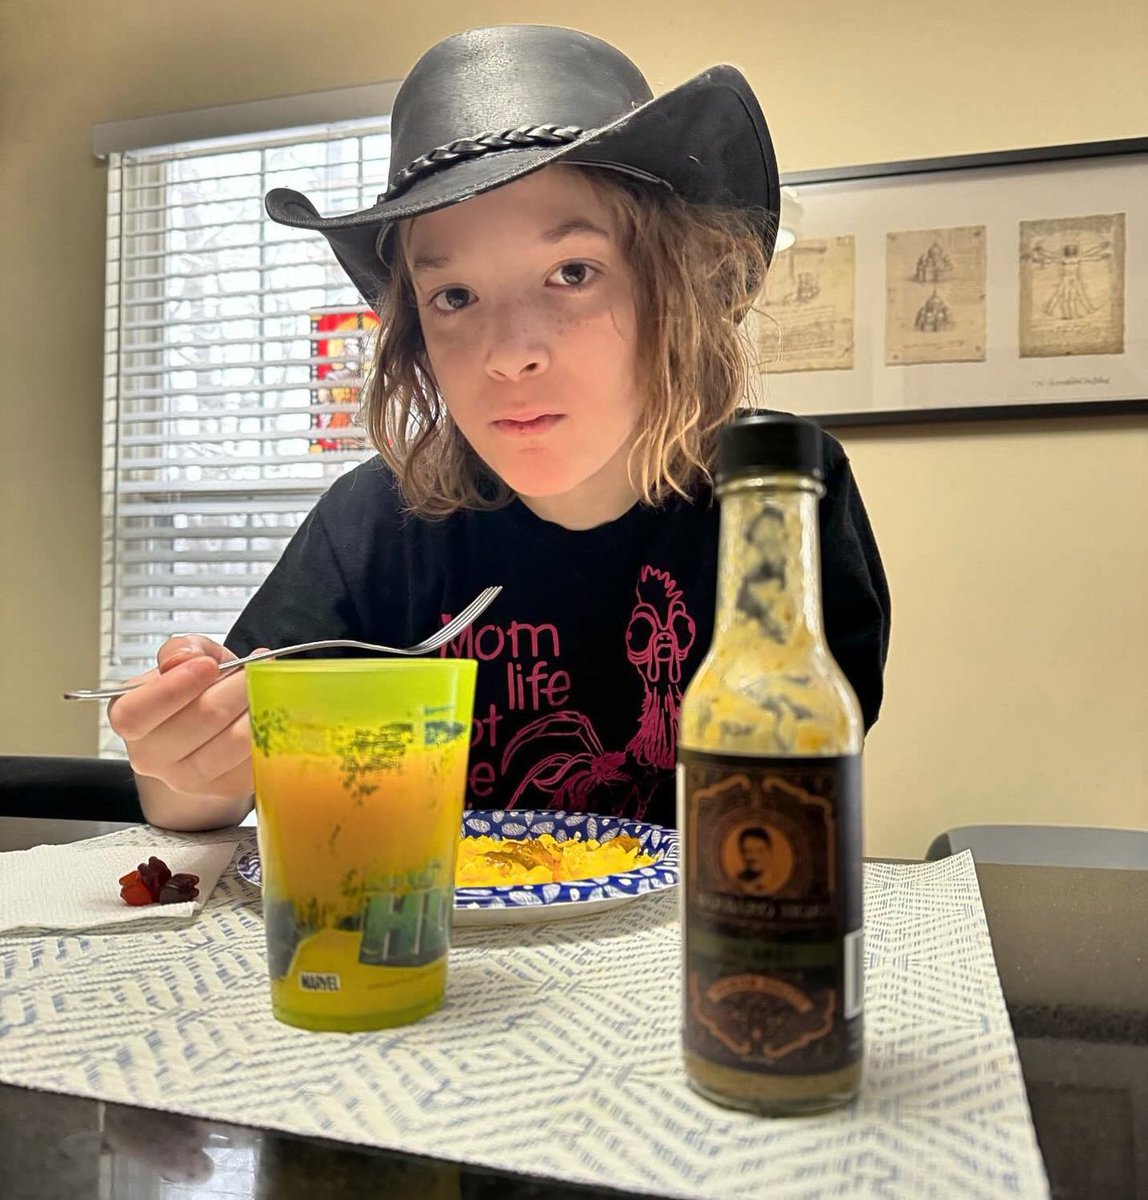 I’m a cowboy. On a Barbaro horse, I ride… Jalabao and eggs are the perfect dish on a snow day.
#BarbaroMojo #QueBarbaro
#HotSauce #Spicy
#ChiliPepper #HotSauceAddict
#HotSauceLover #SpicyFood
#HeatSeekers #ChiliHead
#SauceBoss #FieryFood